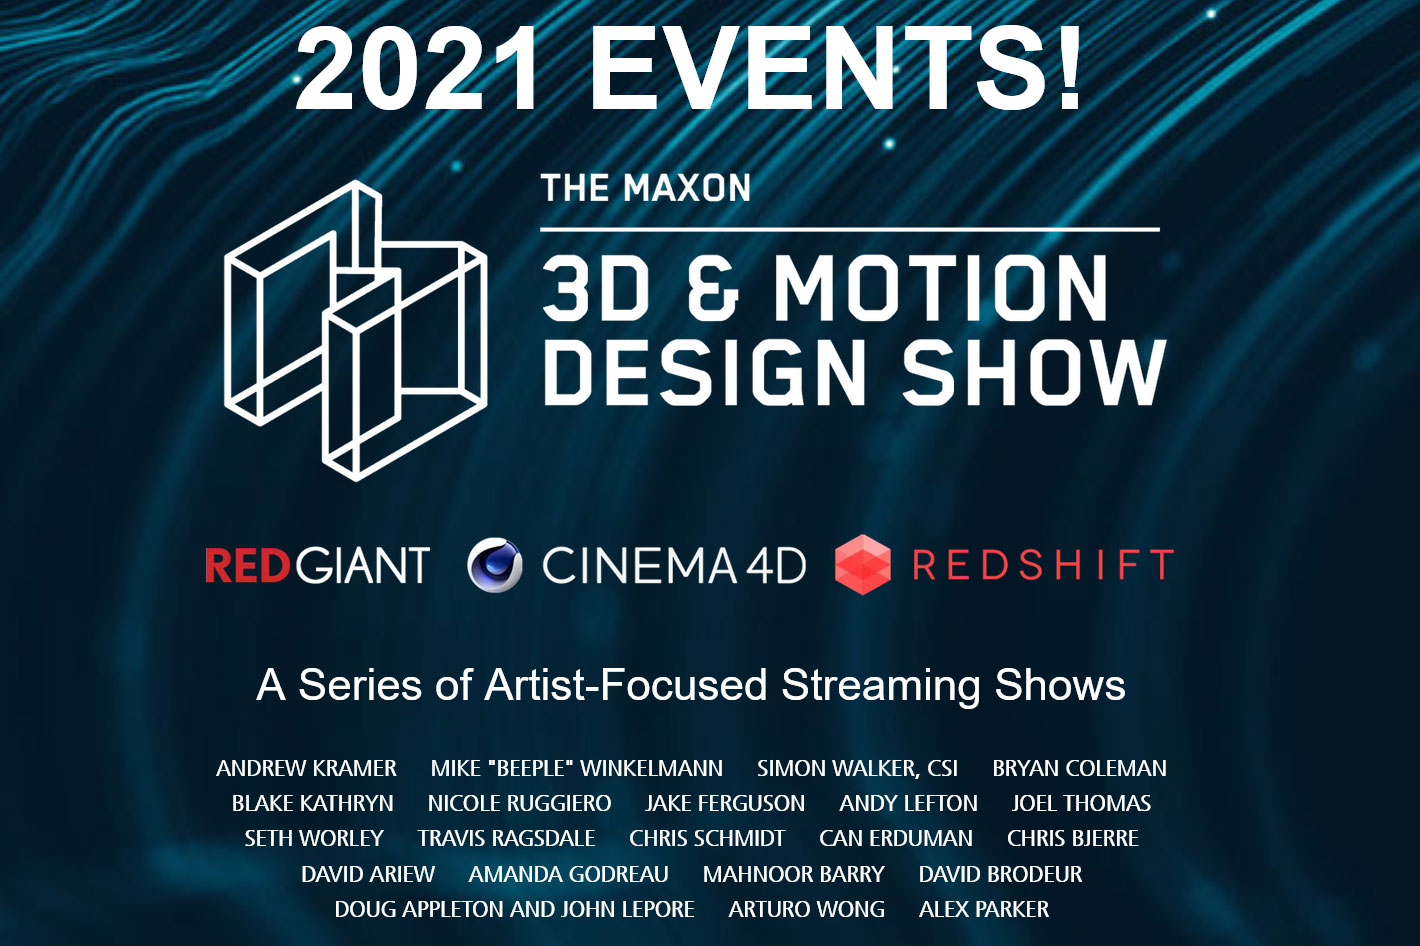 Maxon: two days of 3D & Motion Design Show